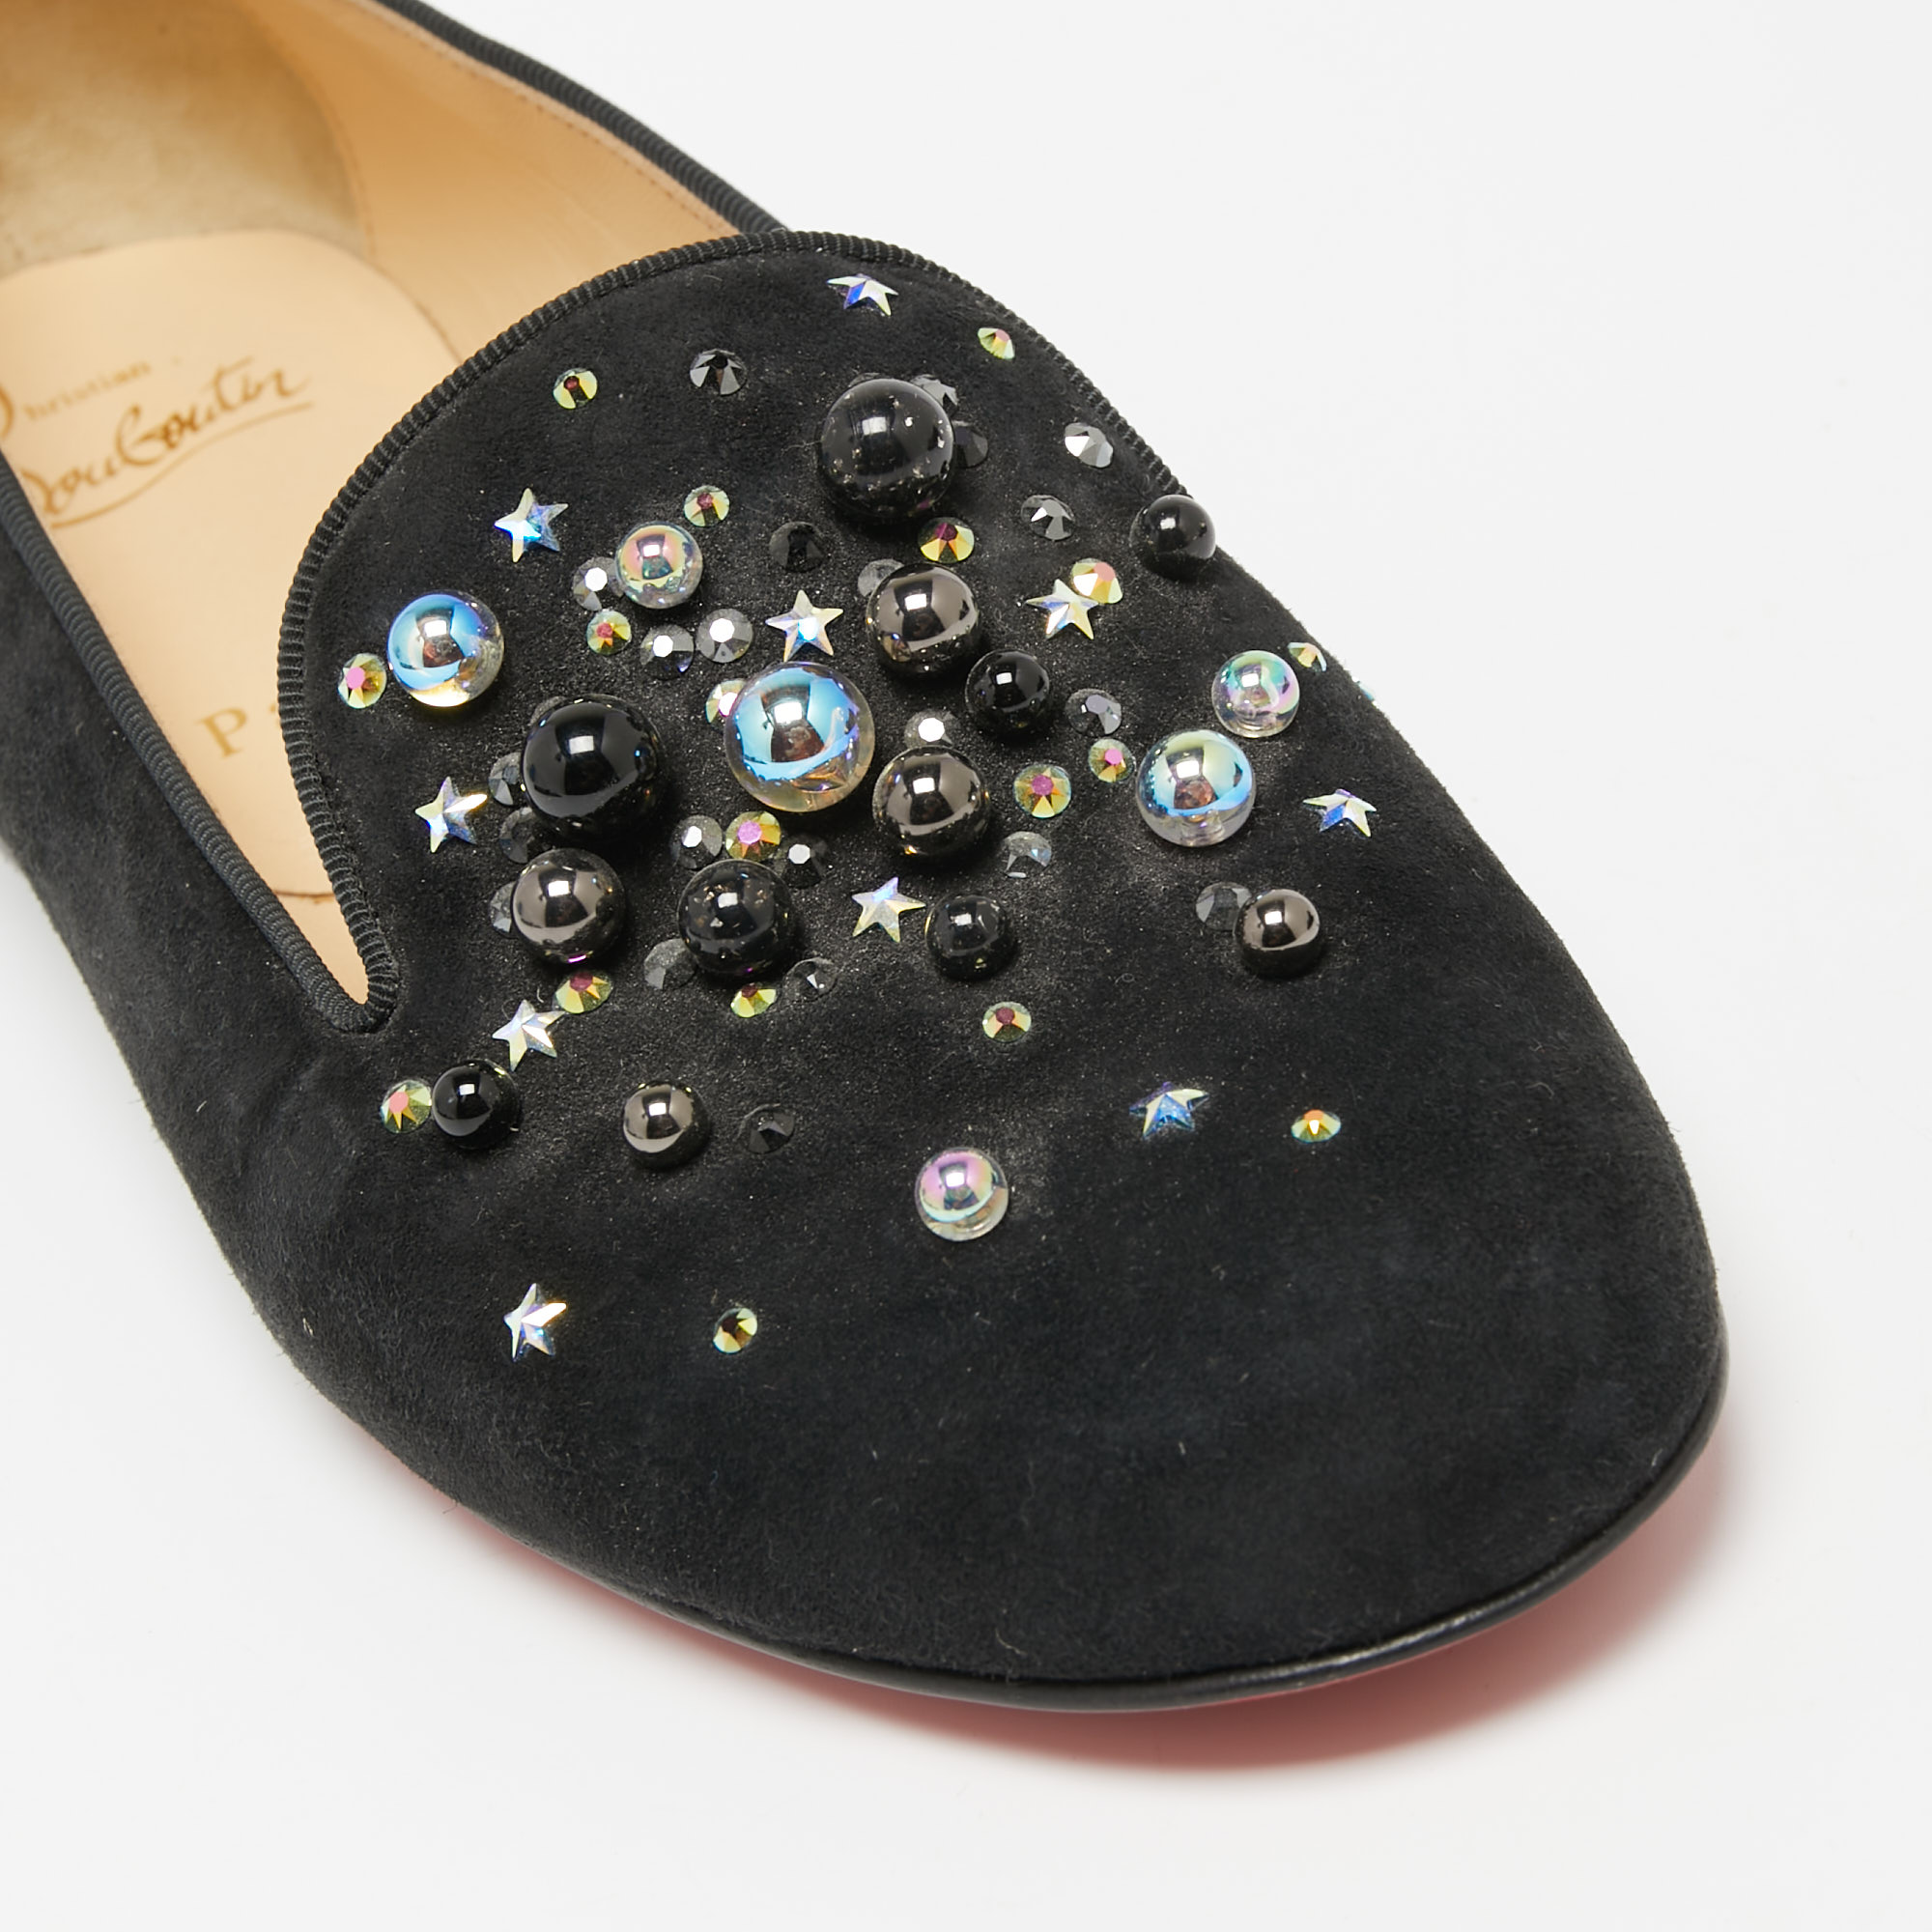 Christian Louboutin Black Suede Candy Studded Smoking Slippers Size 36